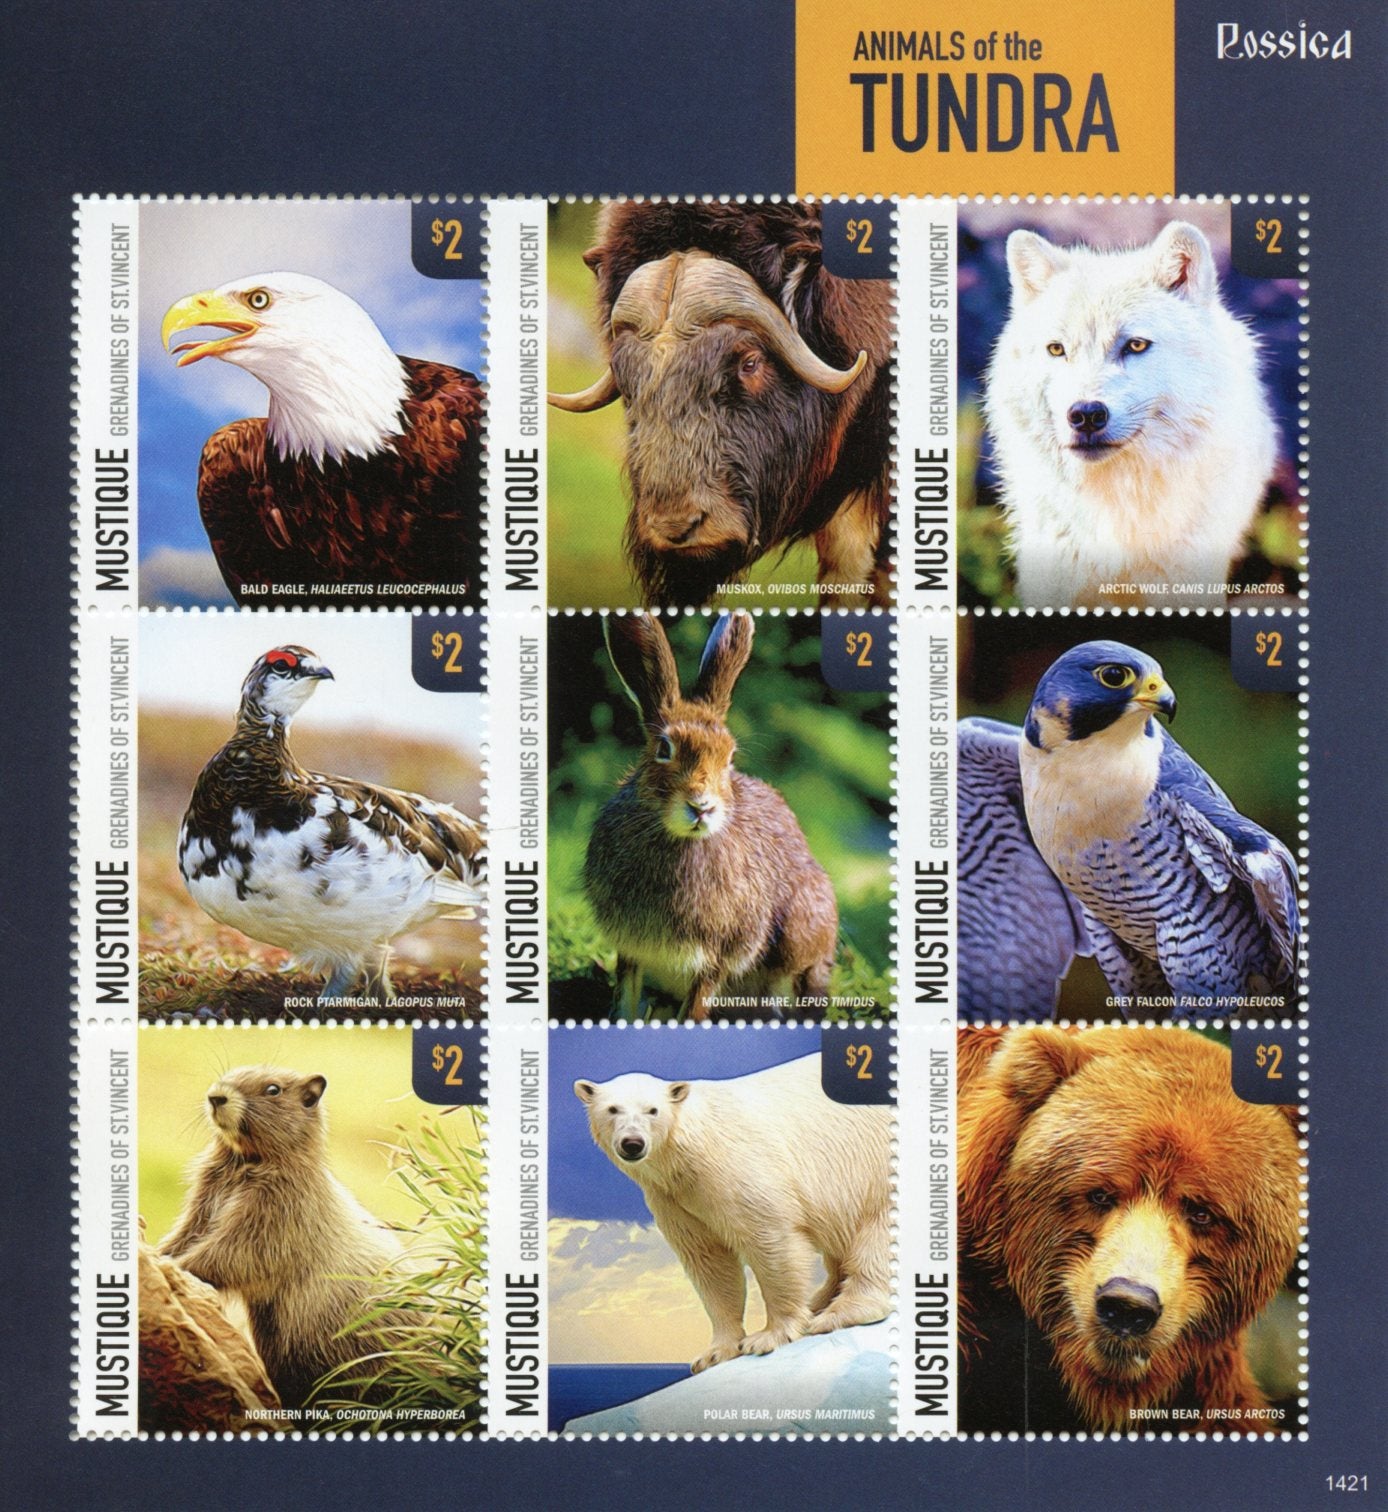 Mustique Gren St Vincent 2014 MNH Birds on Stamps Animals of Tundra Rossica Bears 9v M/S